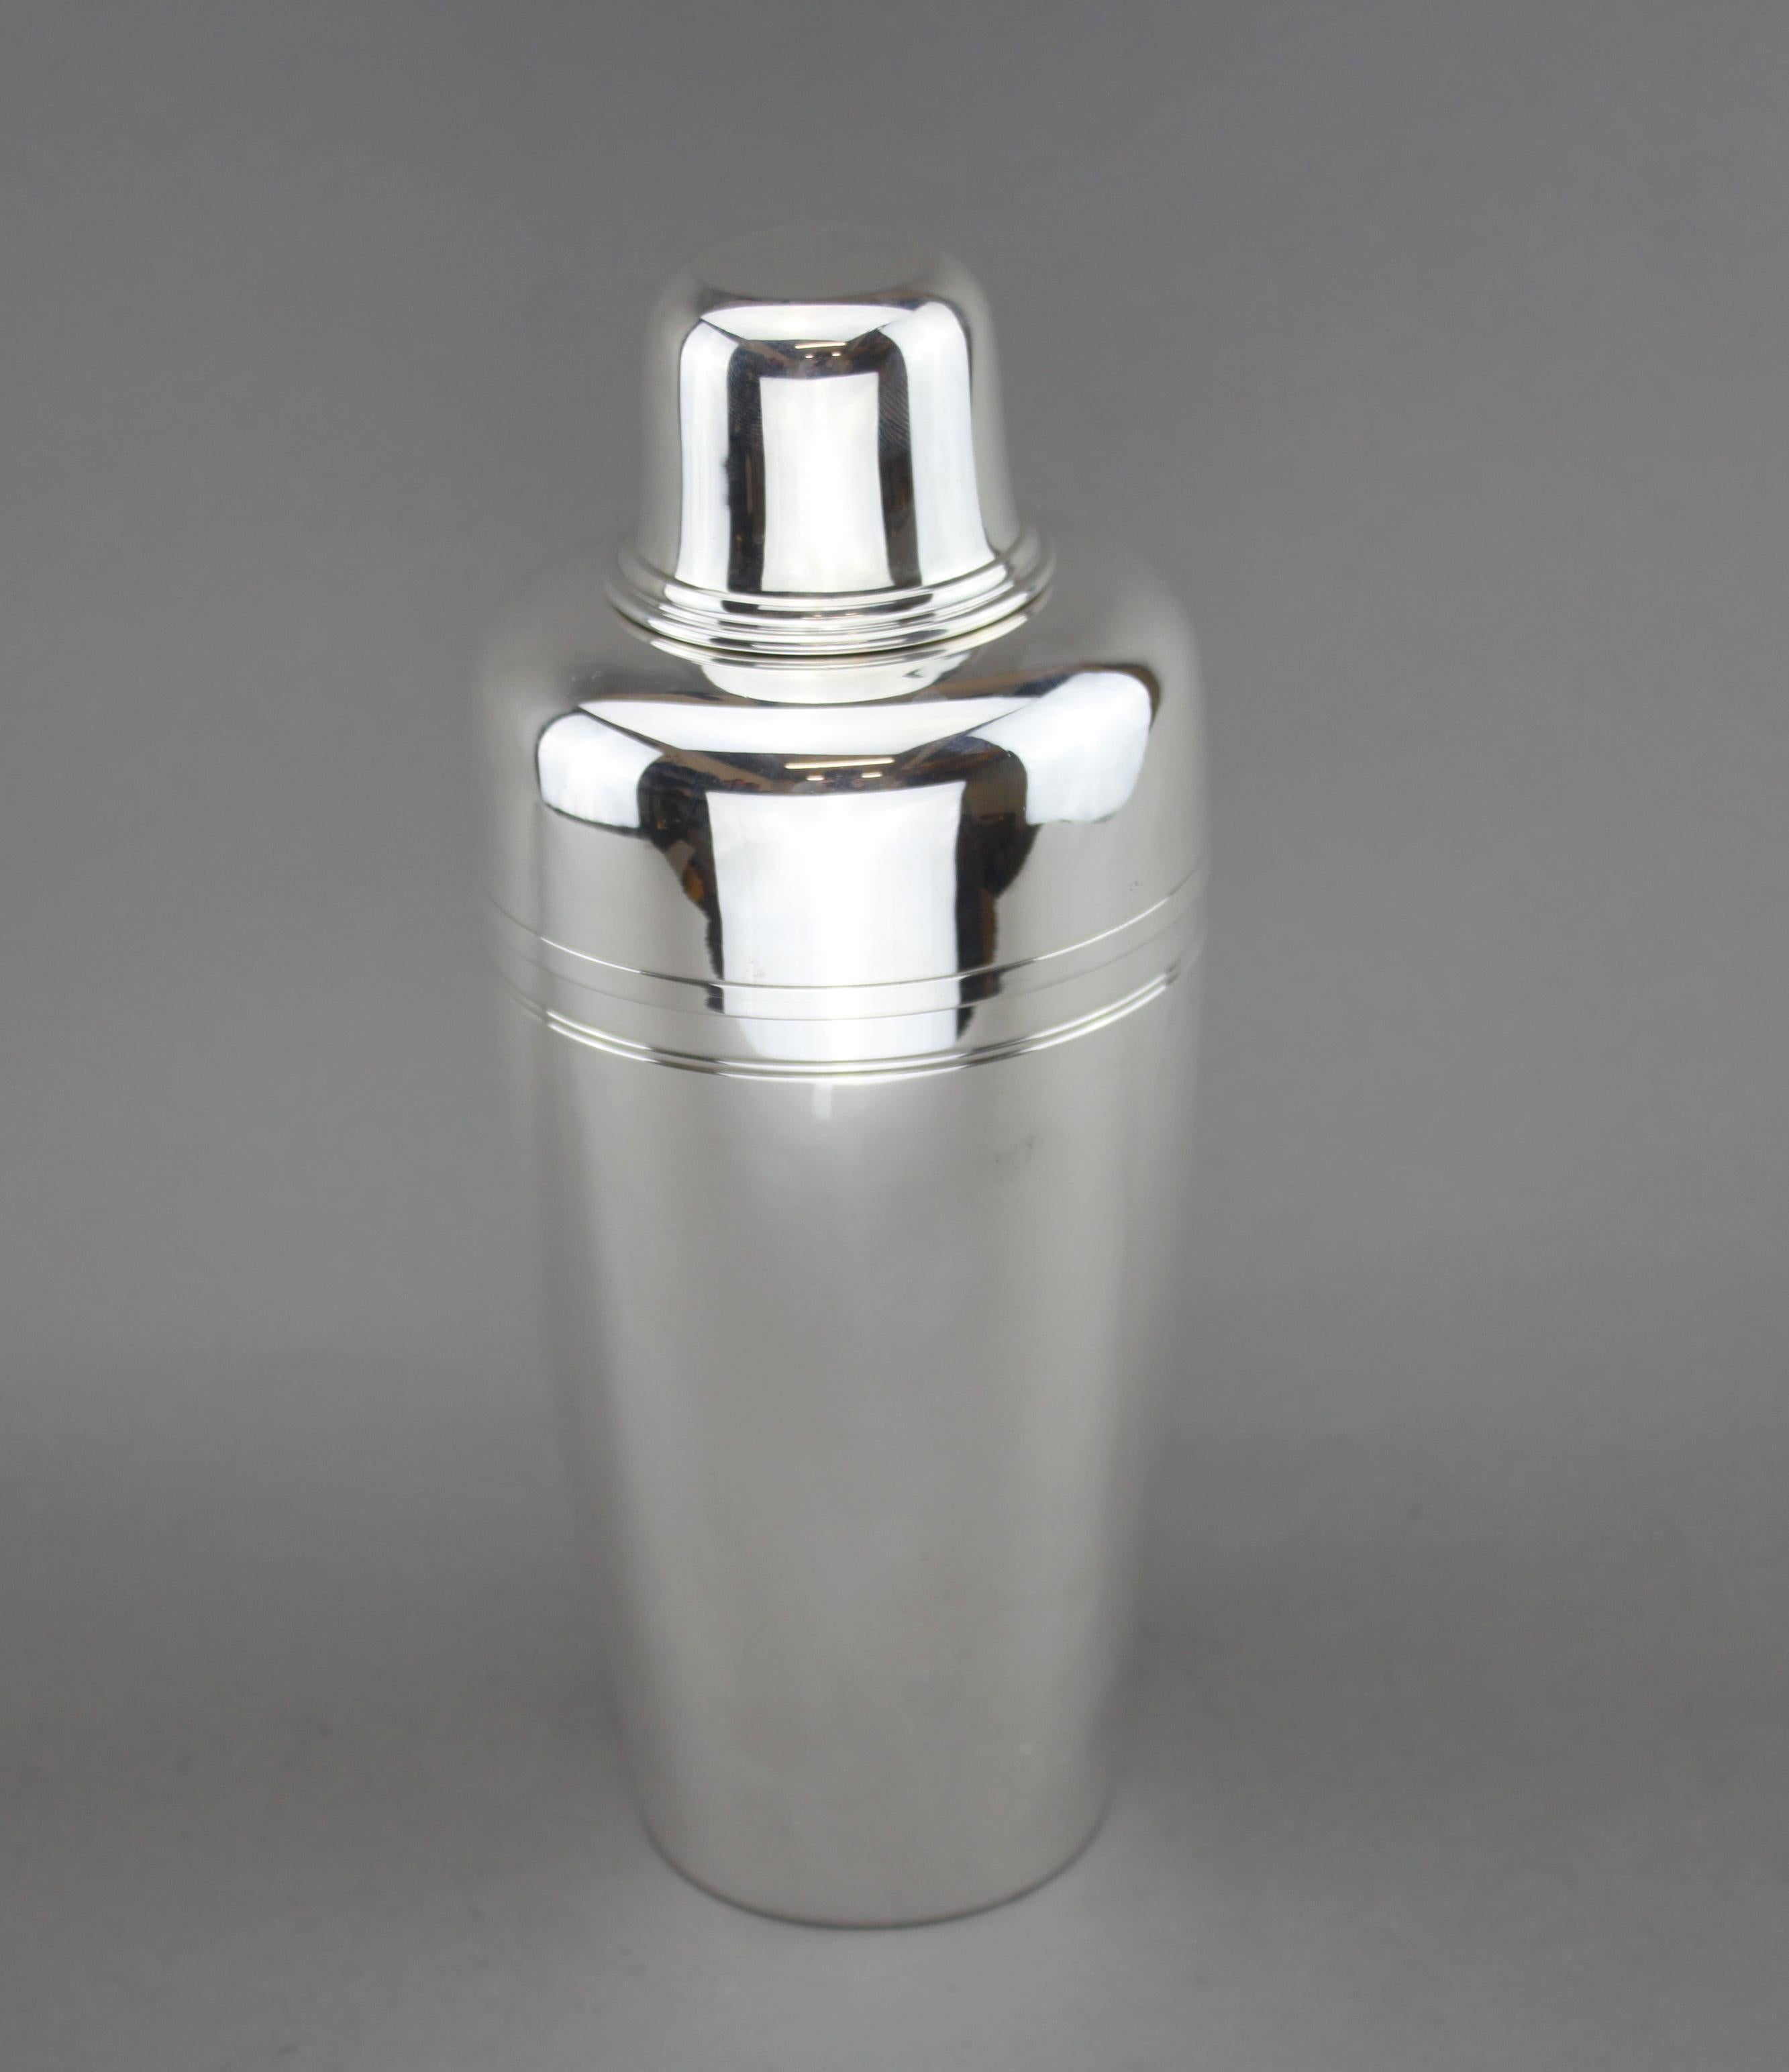 Vintage sterling silver cocktail shaker.

Made by Tiffany & Co, United States circa 1940 (Directorship of John C. Moore II)
Fully hallmarked.

Dimensions: 
Diameter: 10.2 cm
Height: 23.3 cm
Capacity: 2 Pints
Weight: 611 grams

Condition: